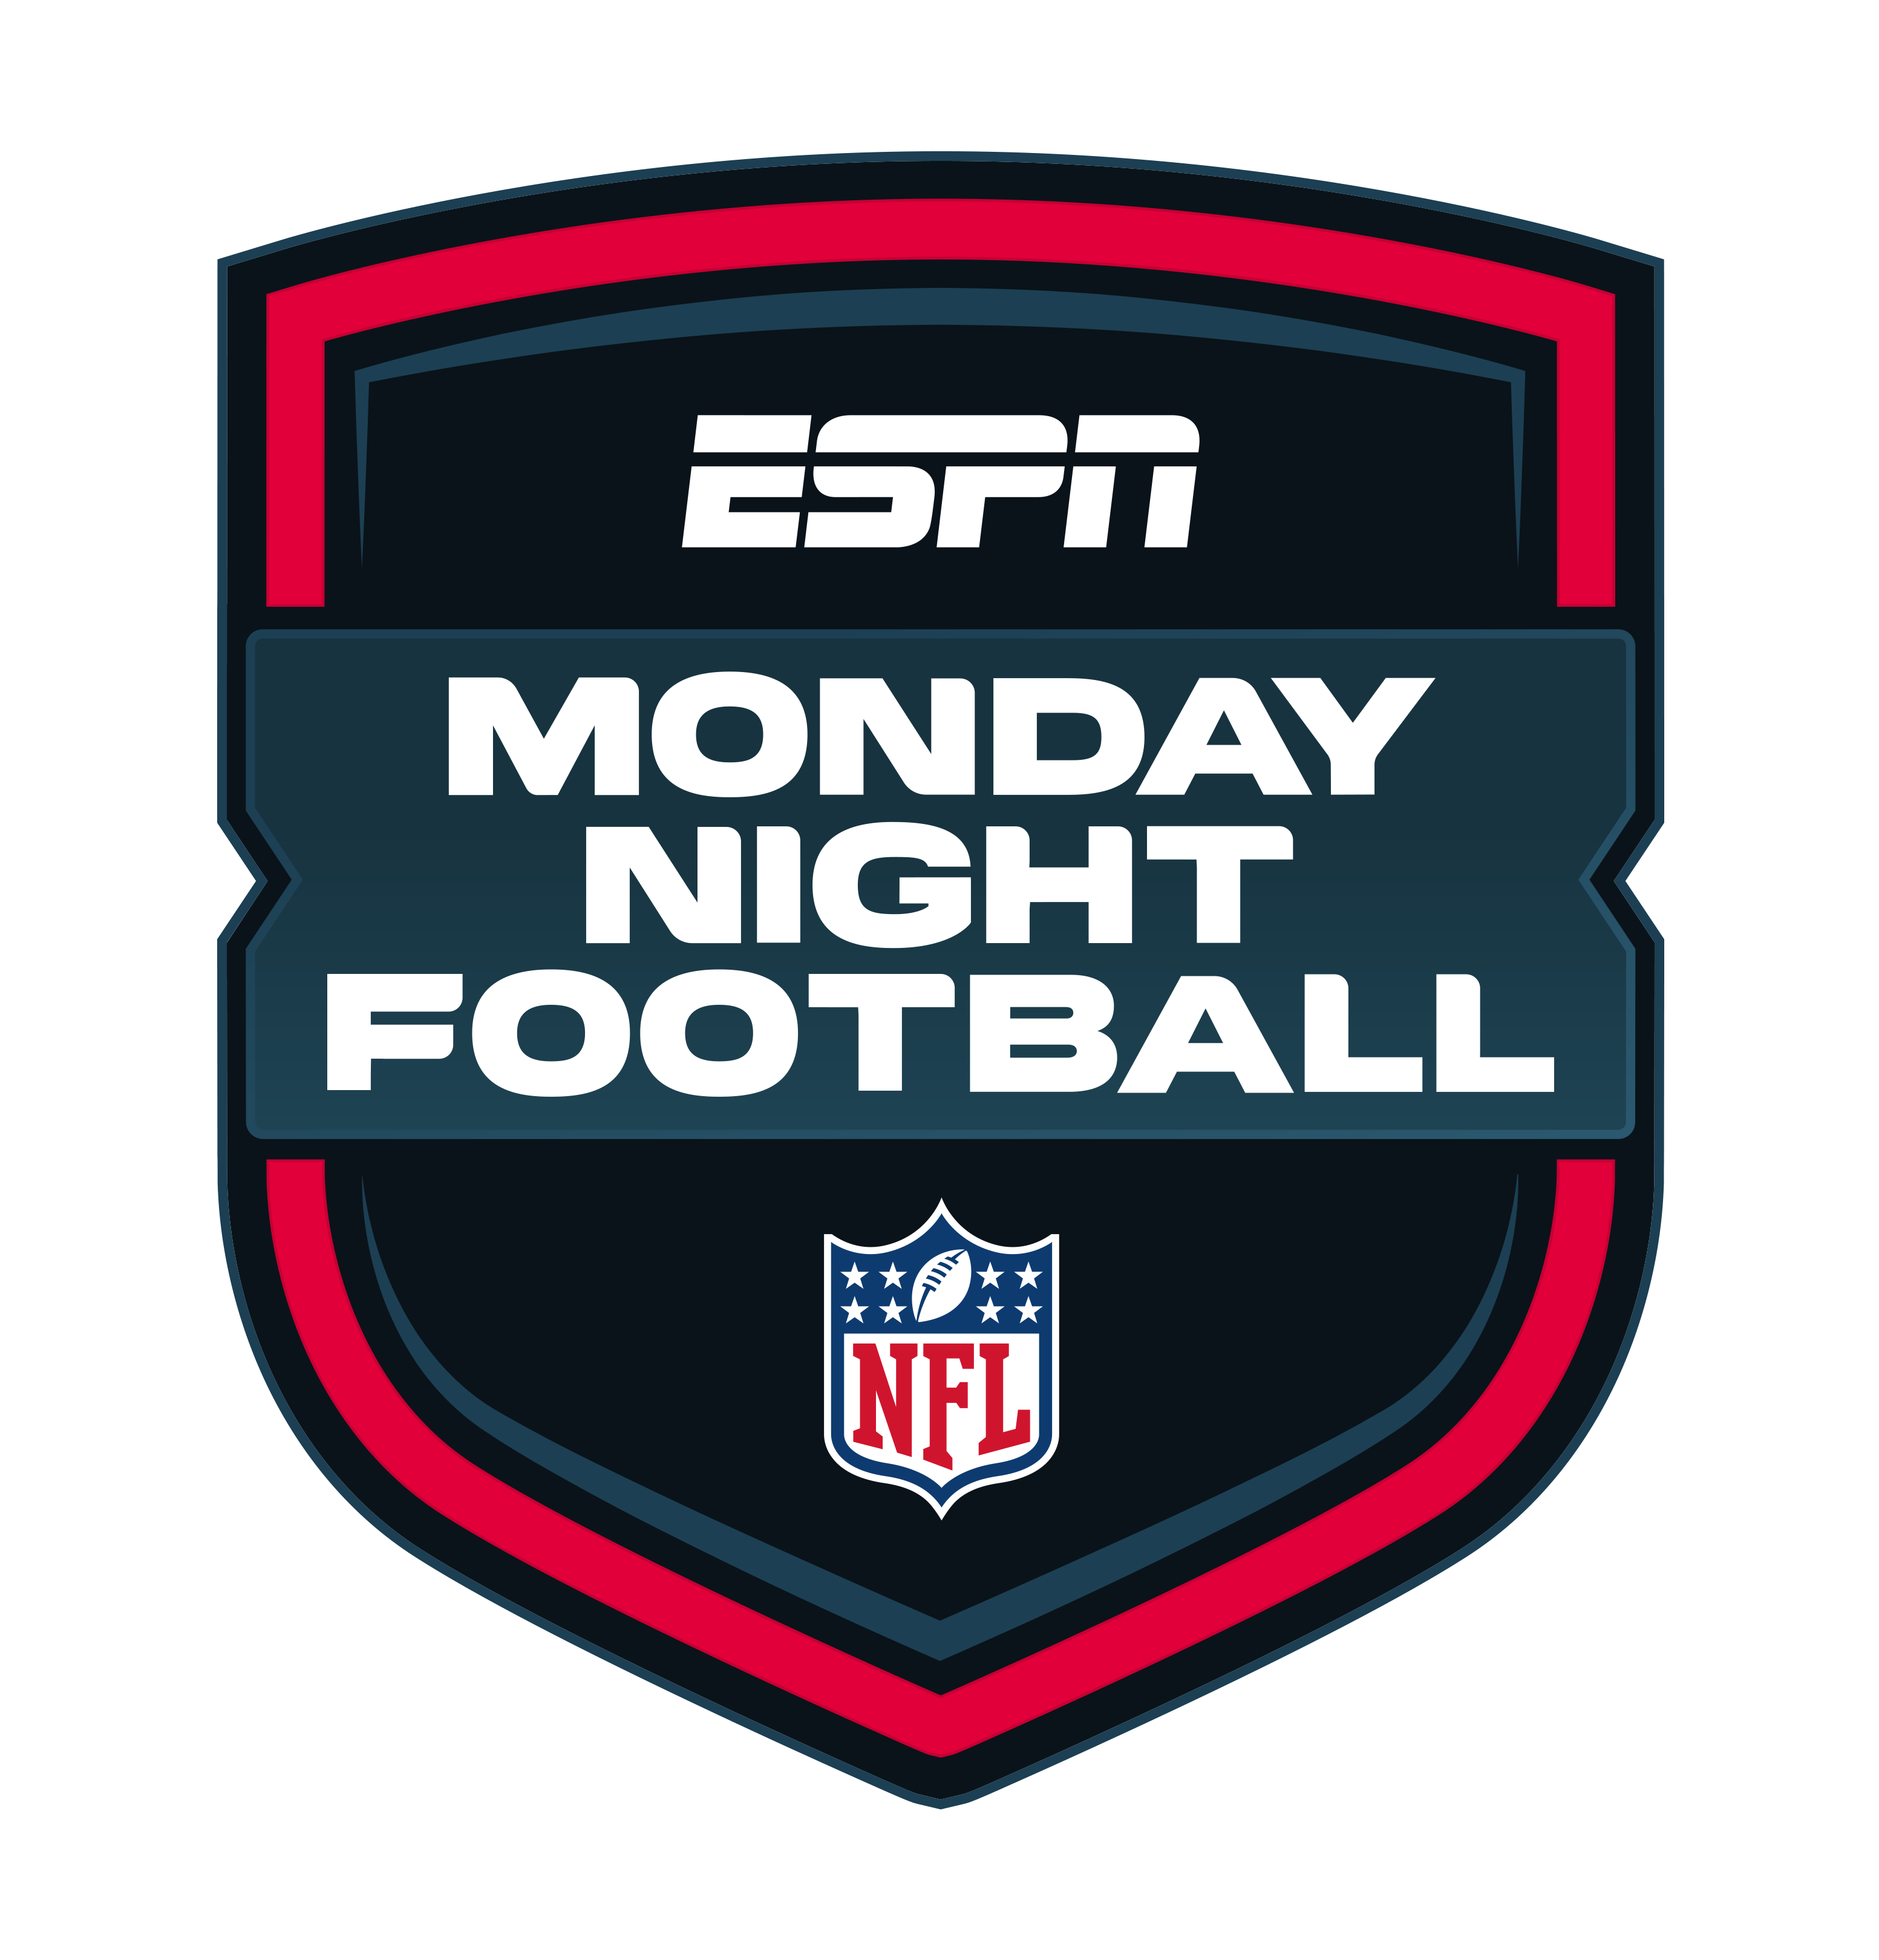 thursday night football tonight what channel is it on